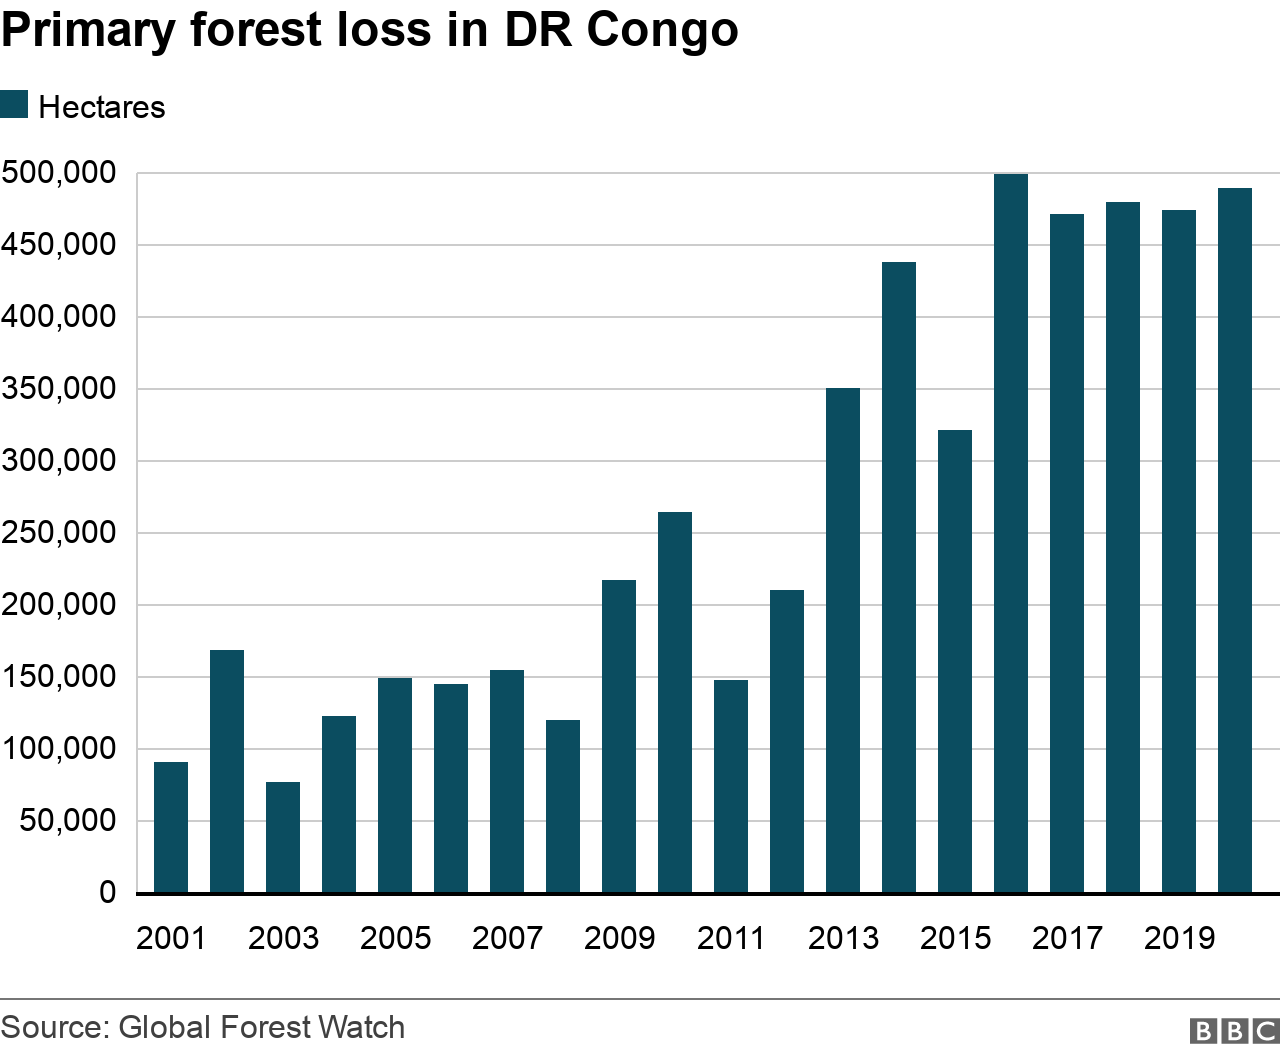 Bar chart showing annual forest loss in DR Congo